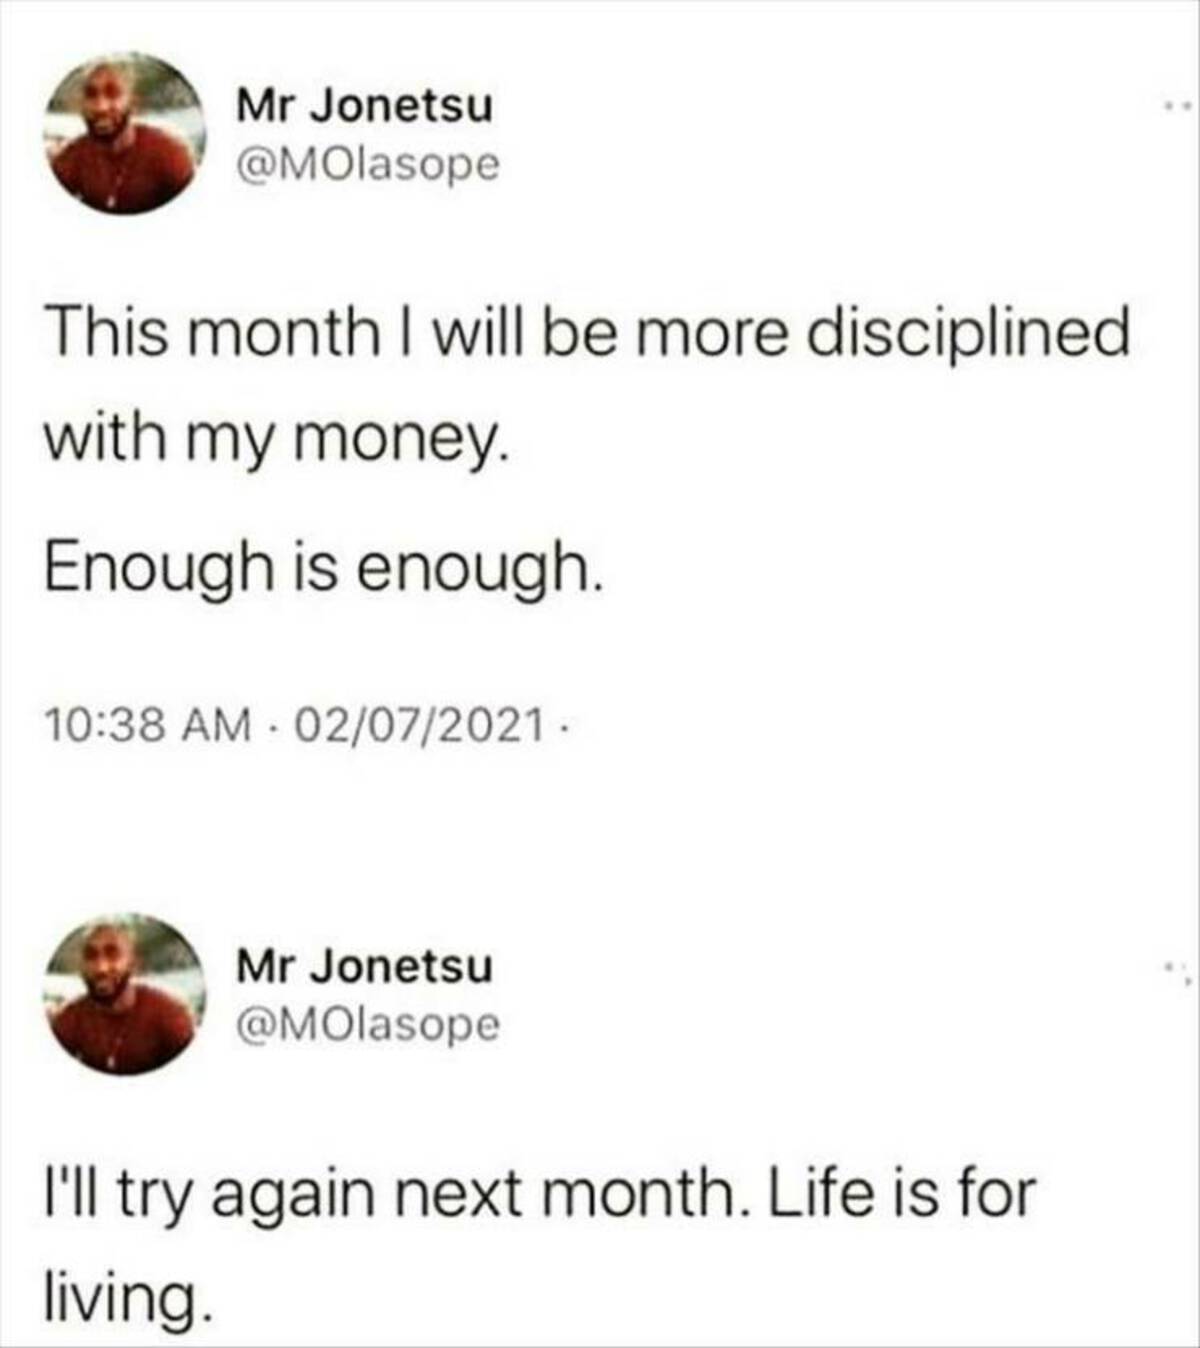 produce - Mr Jonetsu This month I will be more disciplined with my money. Enough is enough. 02072021. Mr Jonetsu I'll try again next month. Life is for living.